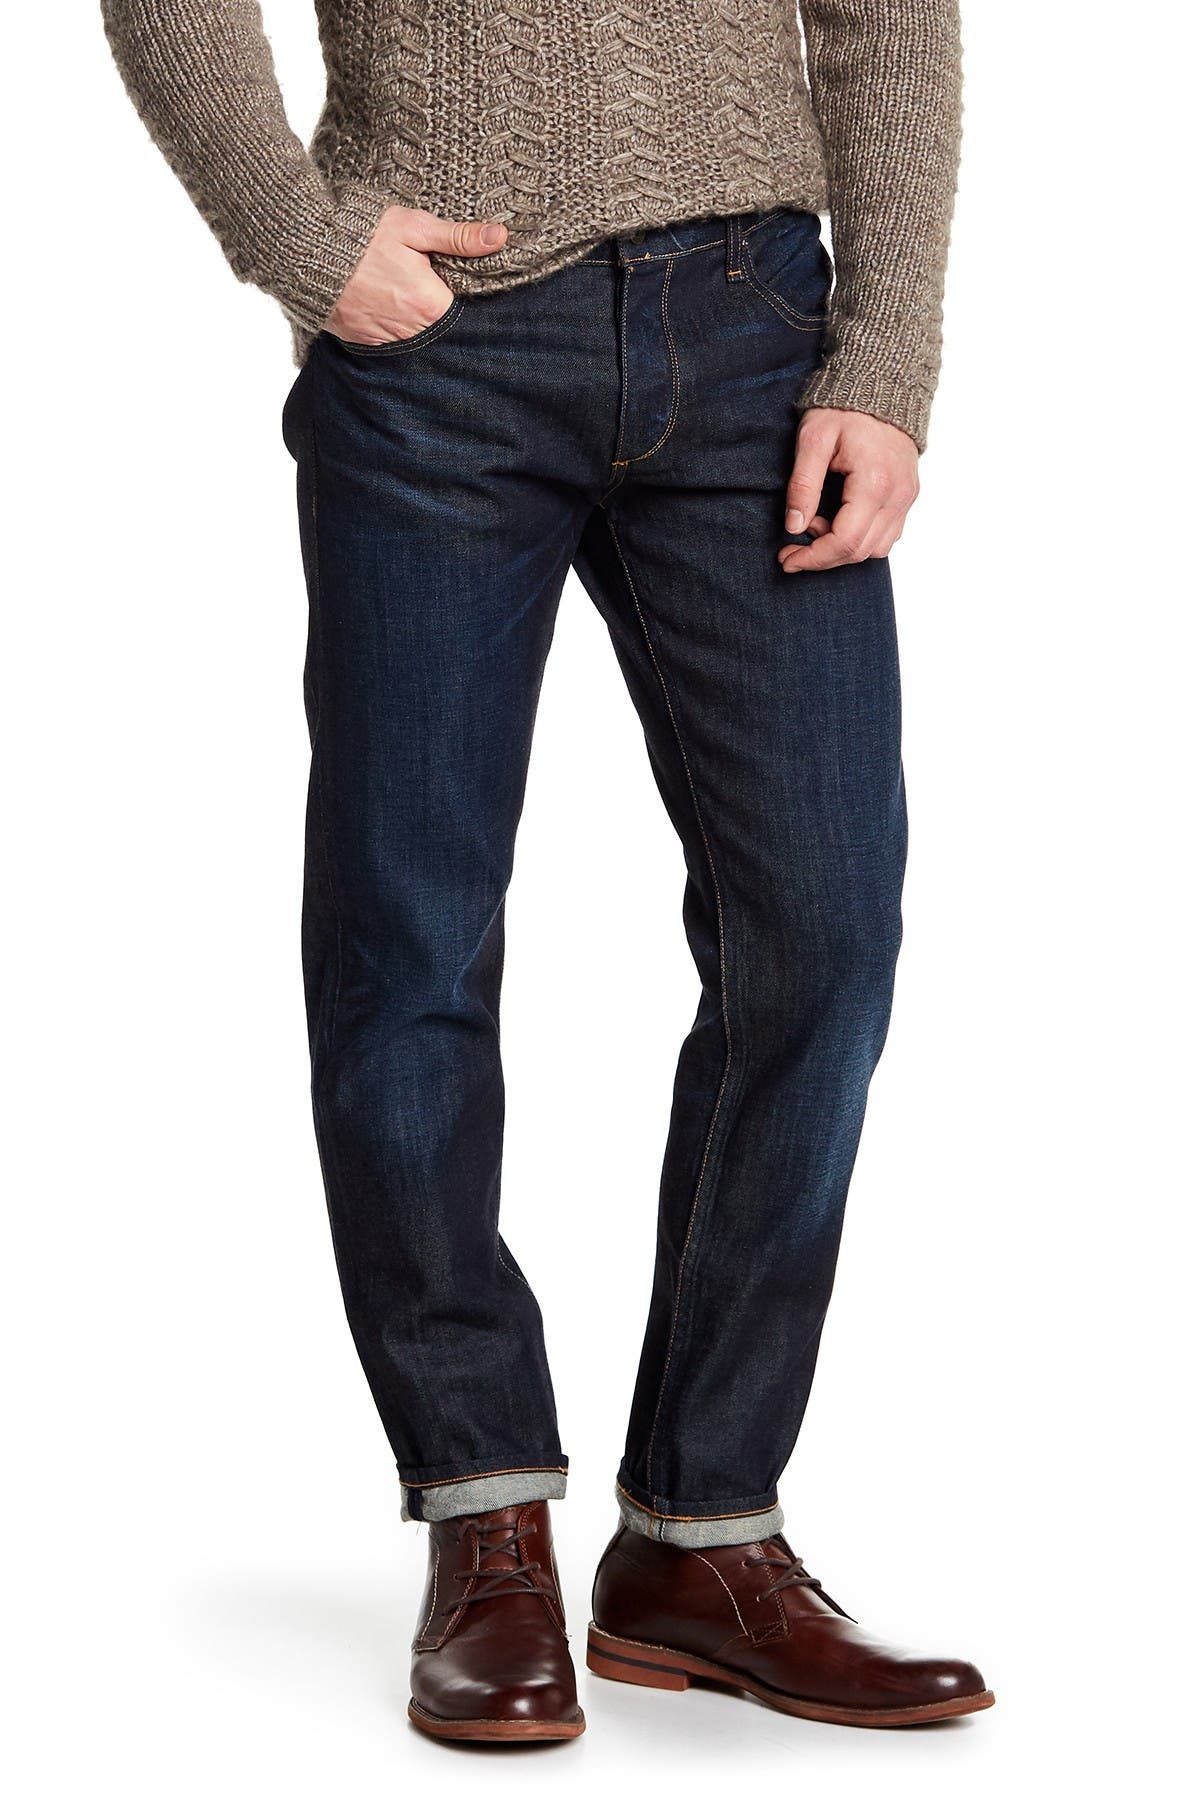 rag and bone standard issue jeans